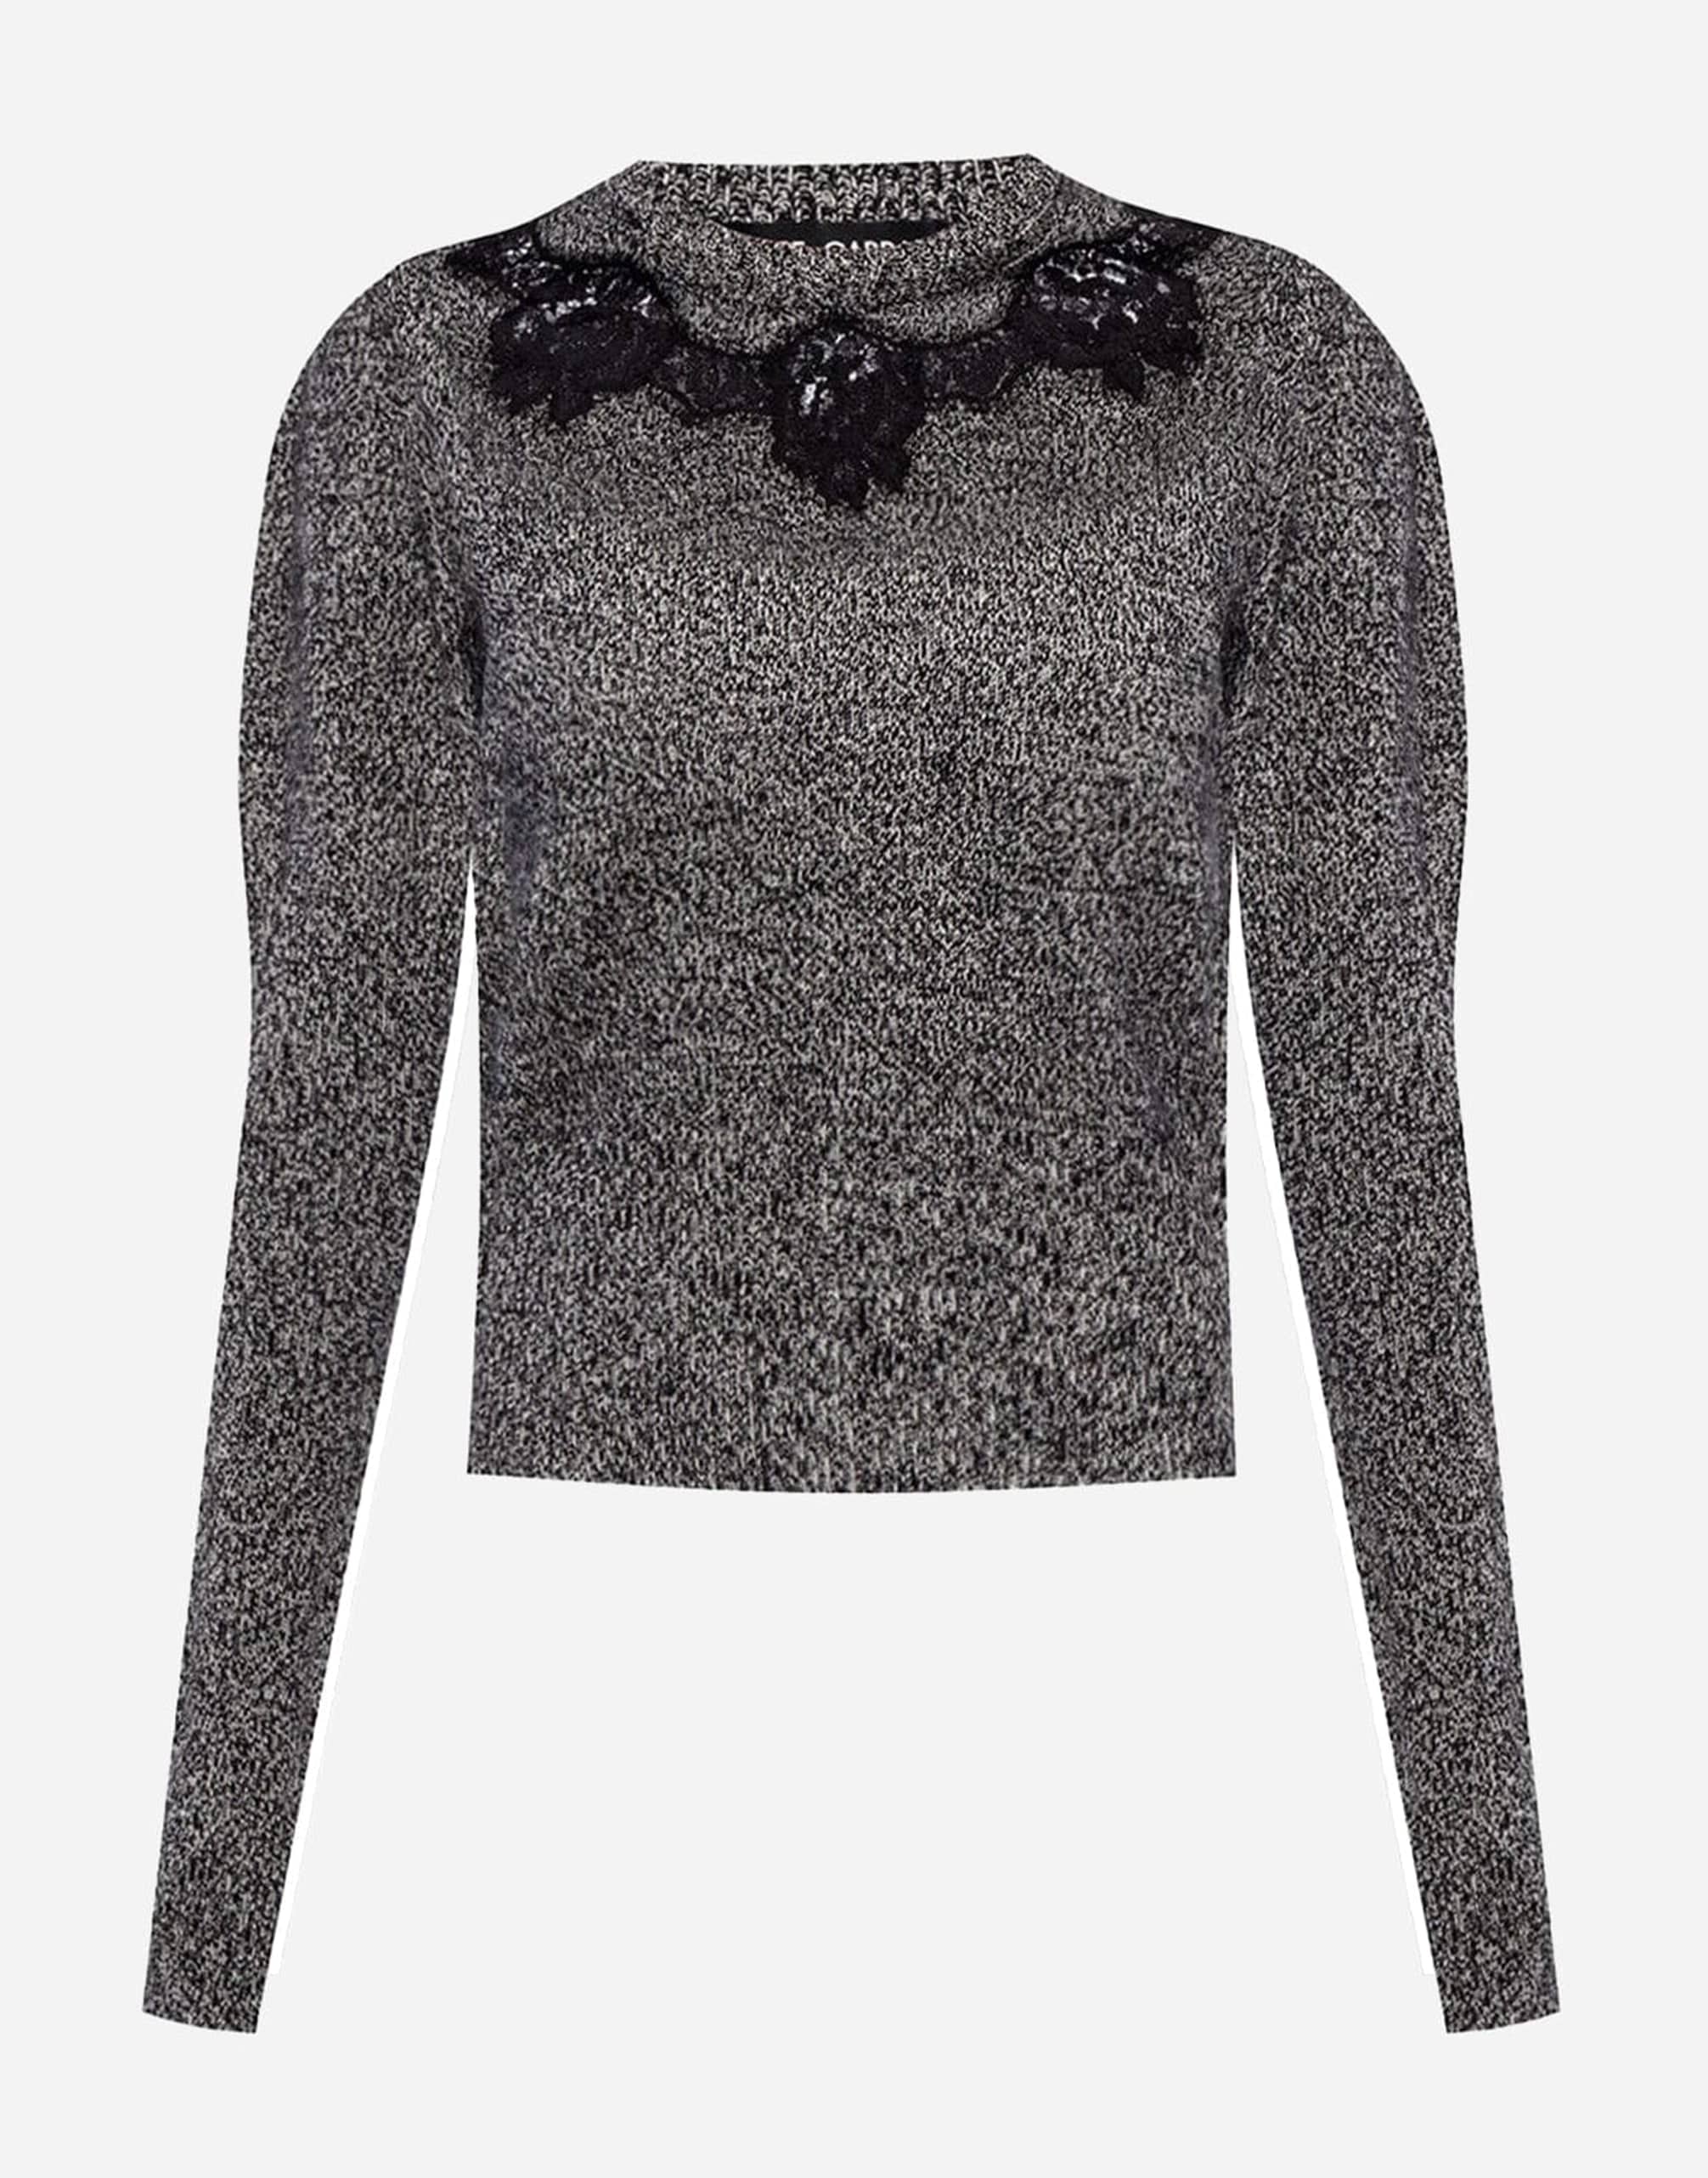 Dolce & Gabbana Lace-Trimmed Sweater